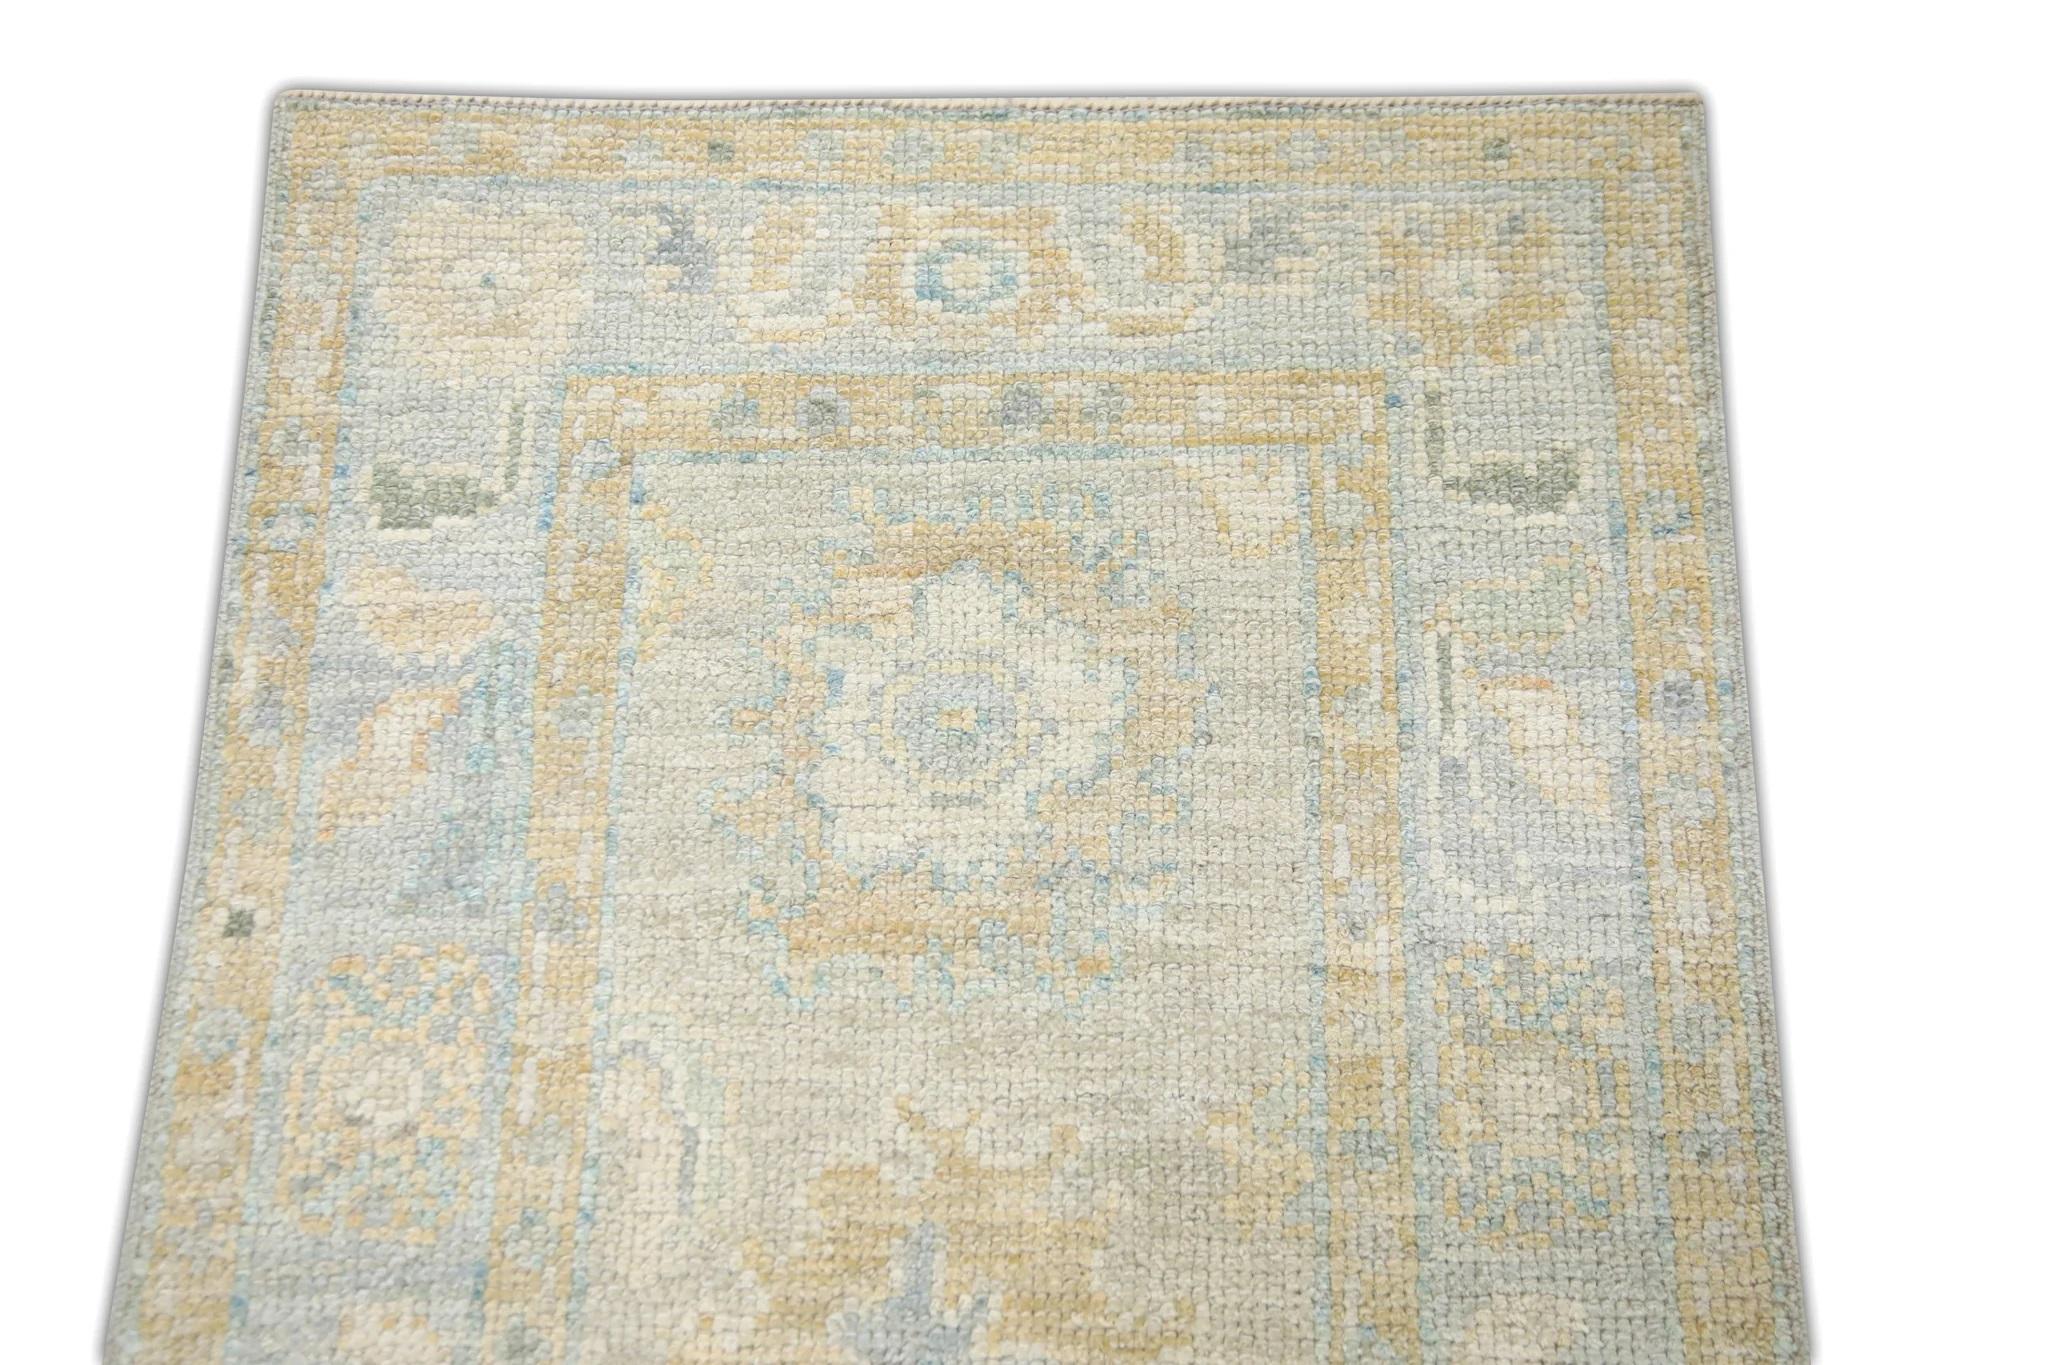 Vegetable Dyed Green and Blue Floral Design Handwoven Wool Turkish Oushak Rug 1'11